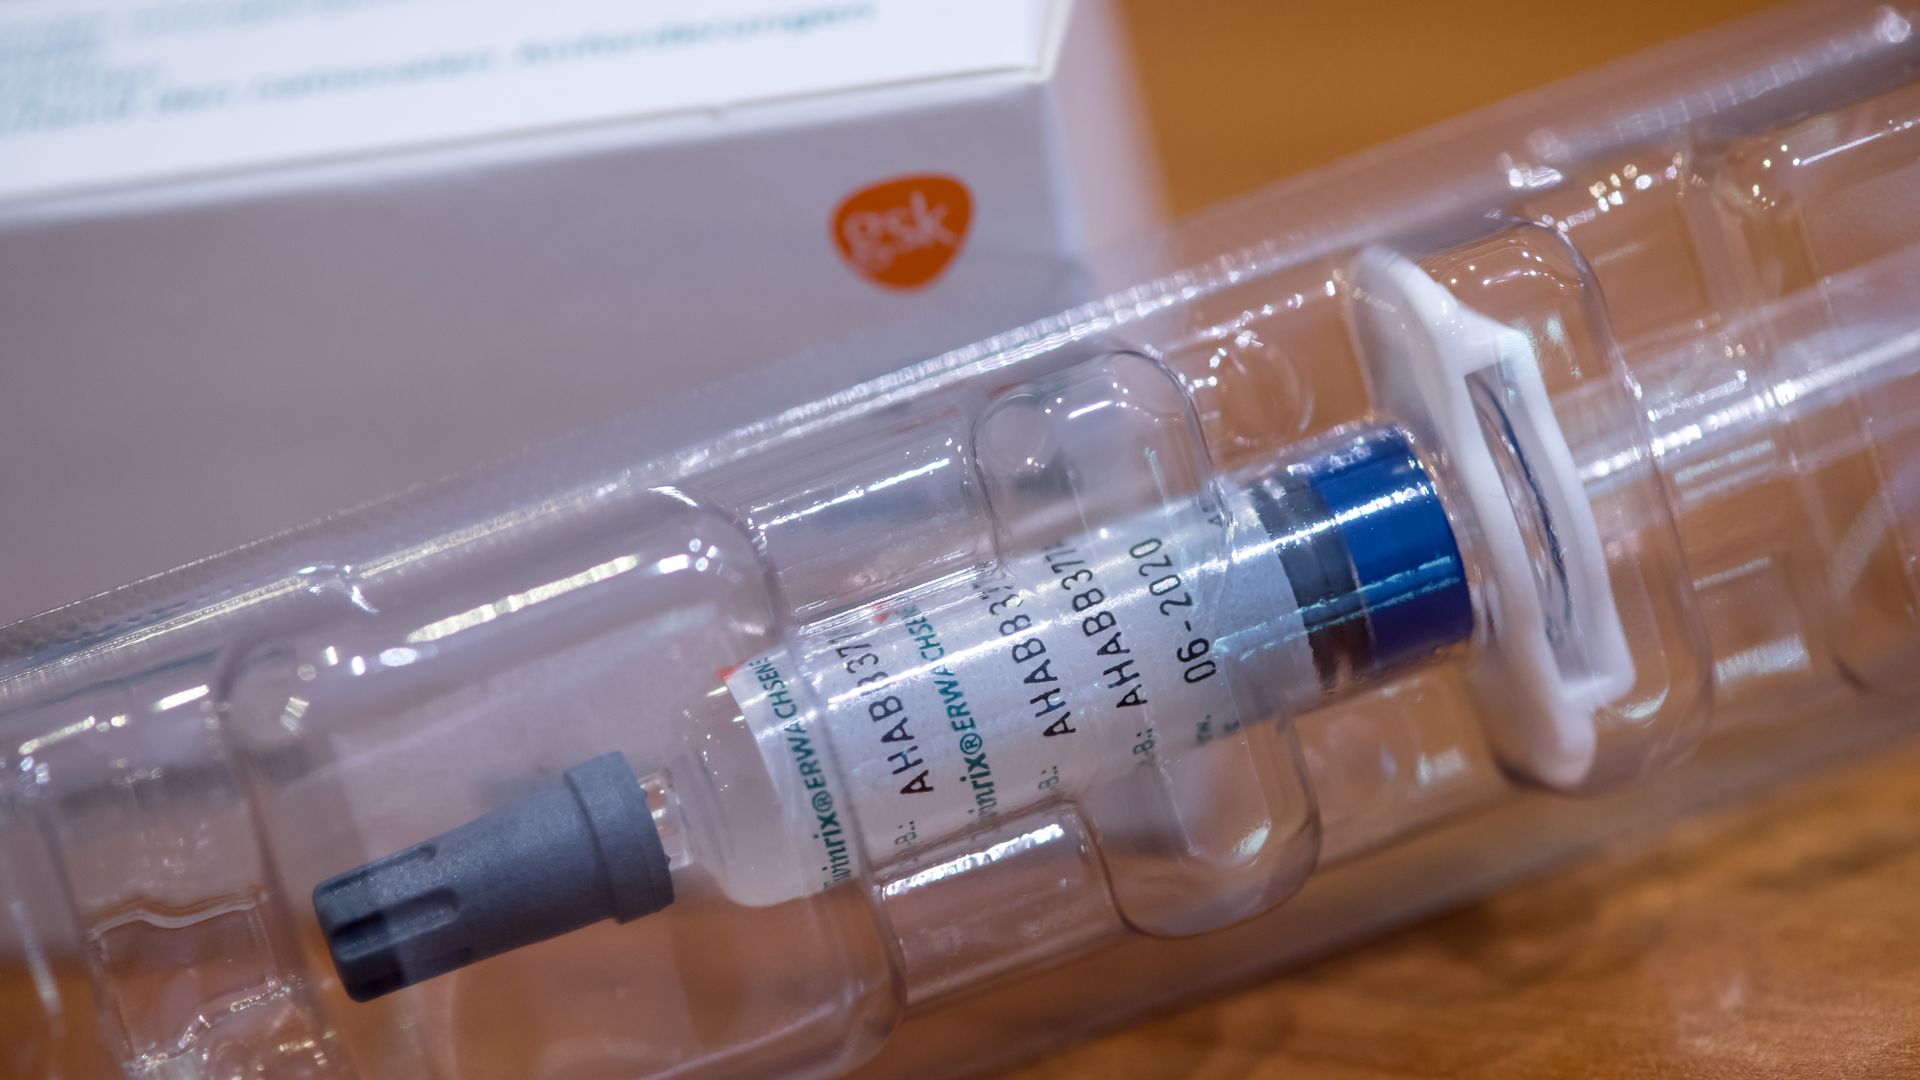 A vaccine syringe with a GlaxoSmithKline box in the background.